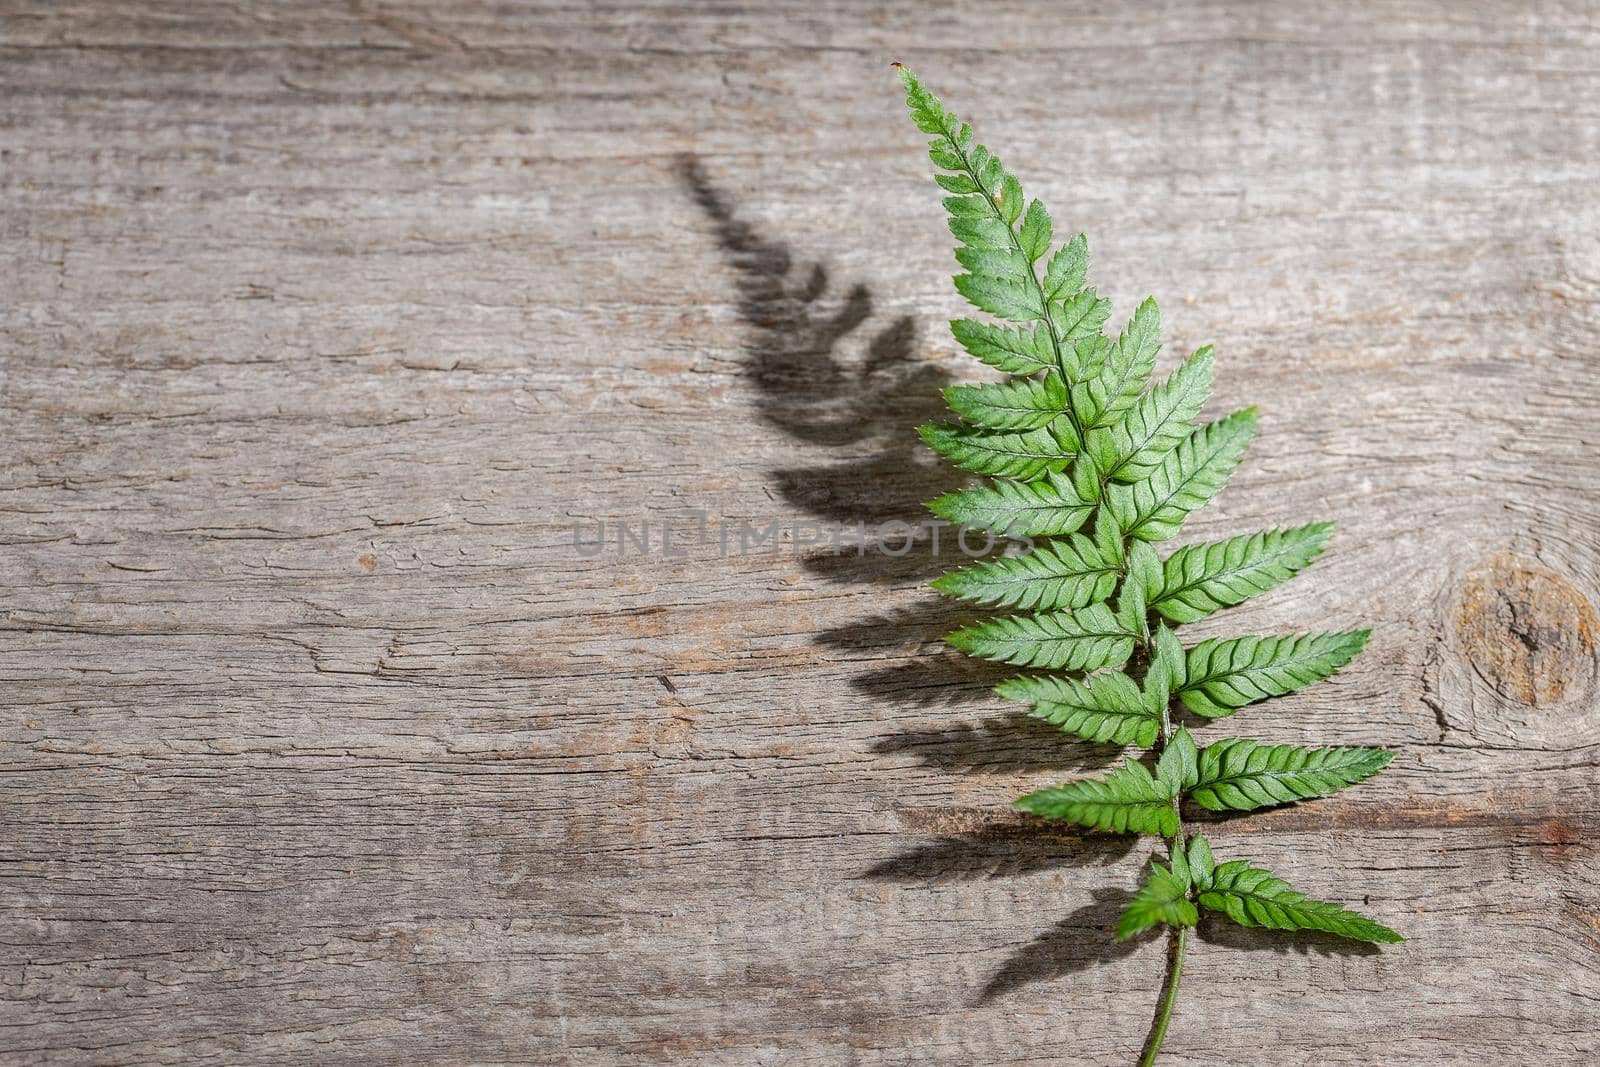 Fern leaf with hursh shadow on wooden background. Top view, space for text